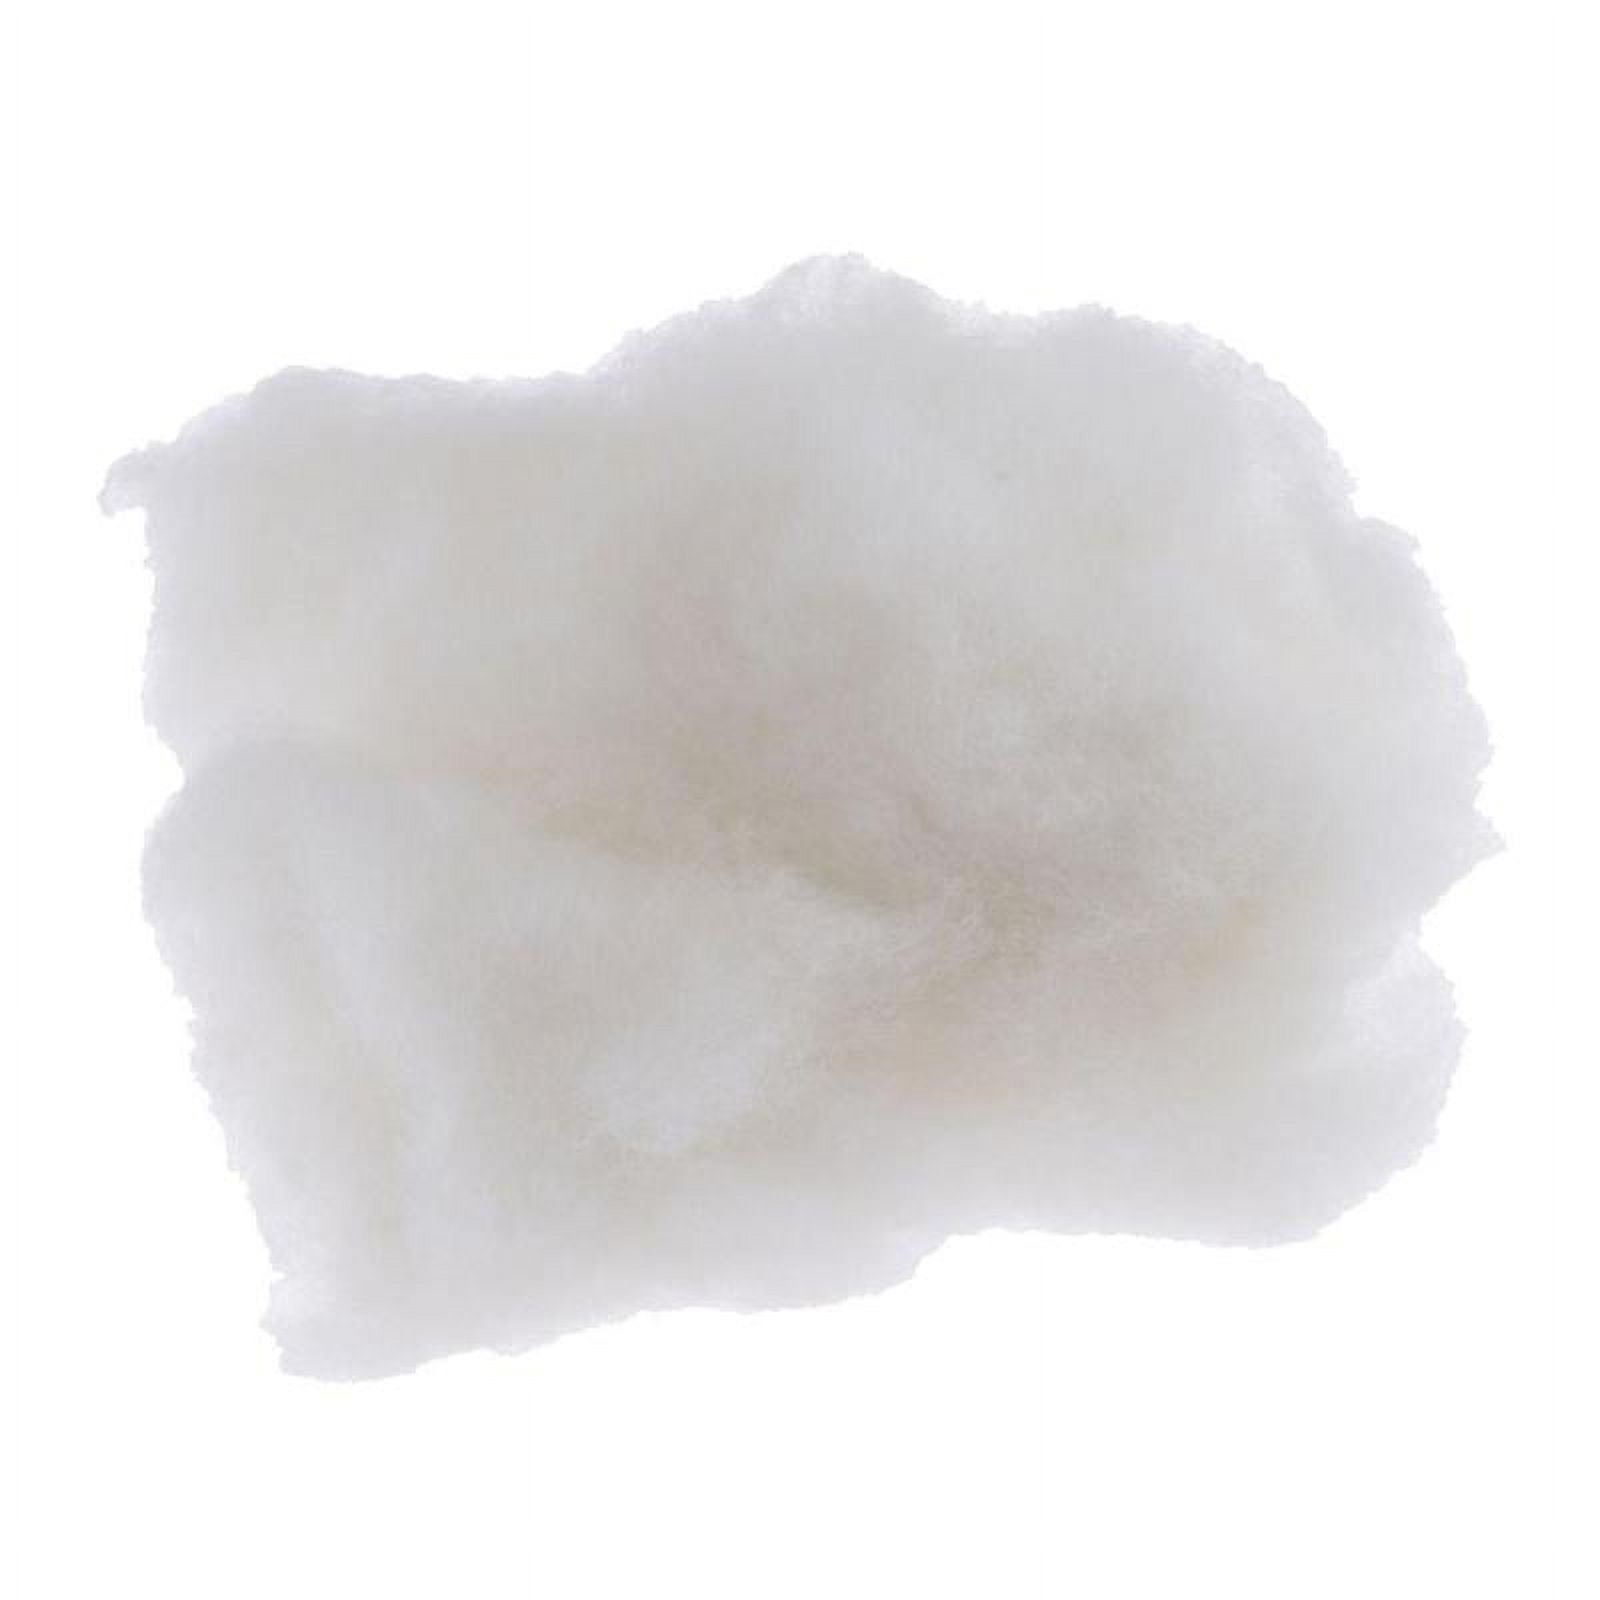  Wool Batting for Stuffing Animals, Crafts, Cushions, Pillow  Filler, Needle Felting (16oz, Natural White) : Arts, Crafts & Sewing